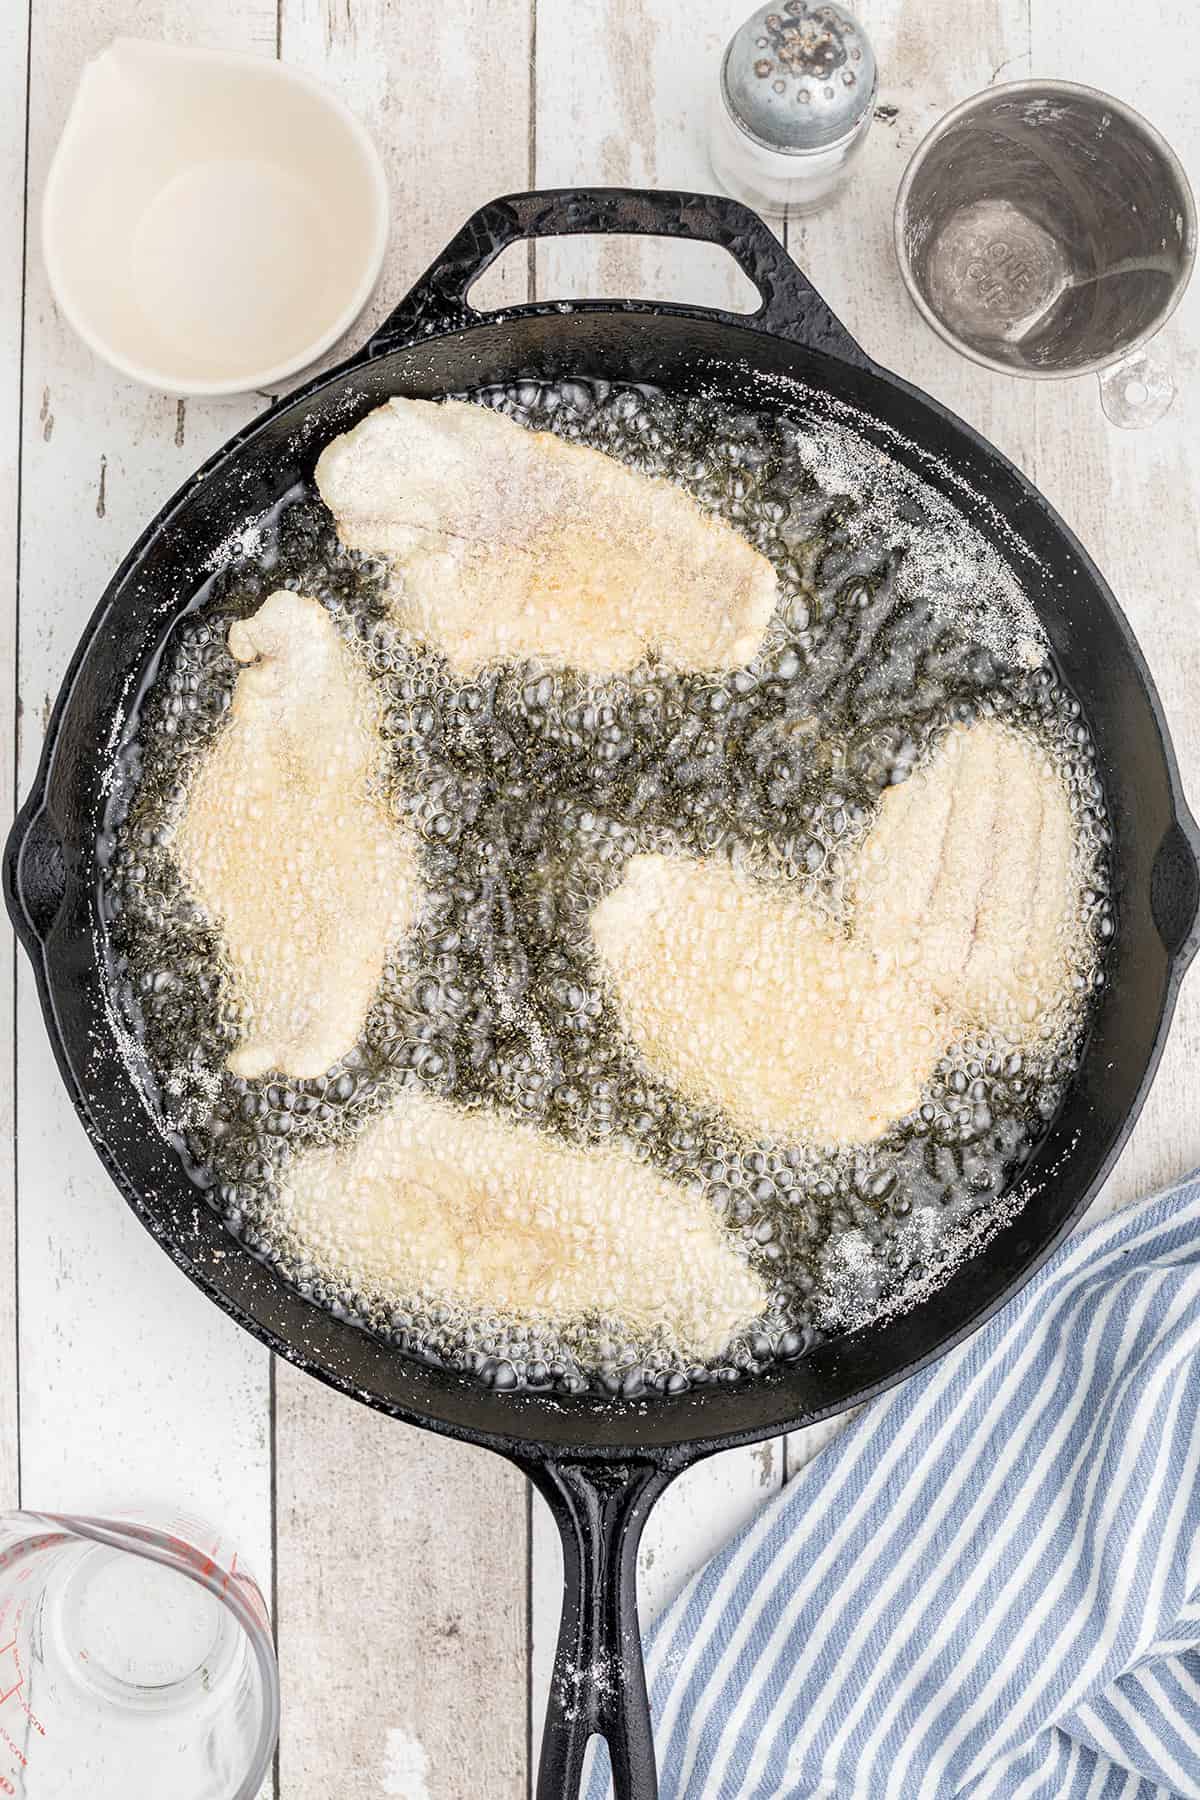 Catfish frying in a skillet.